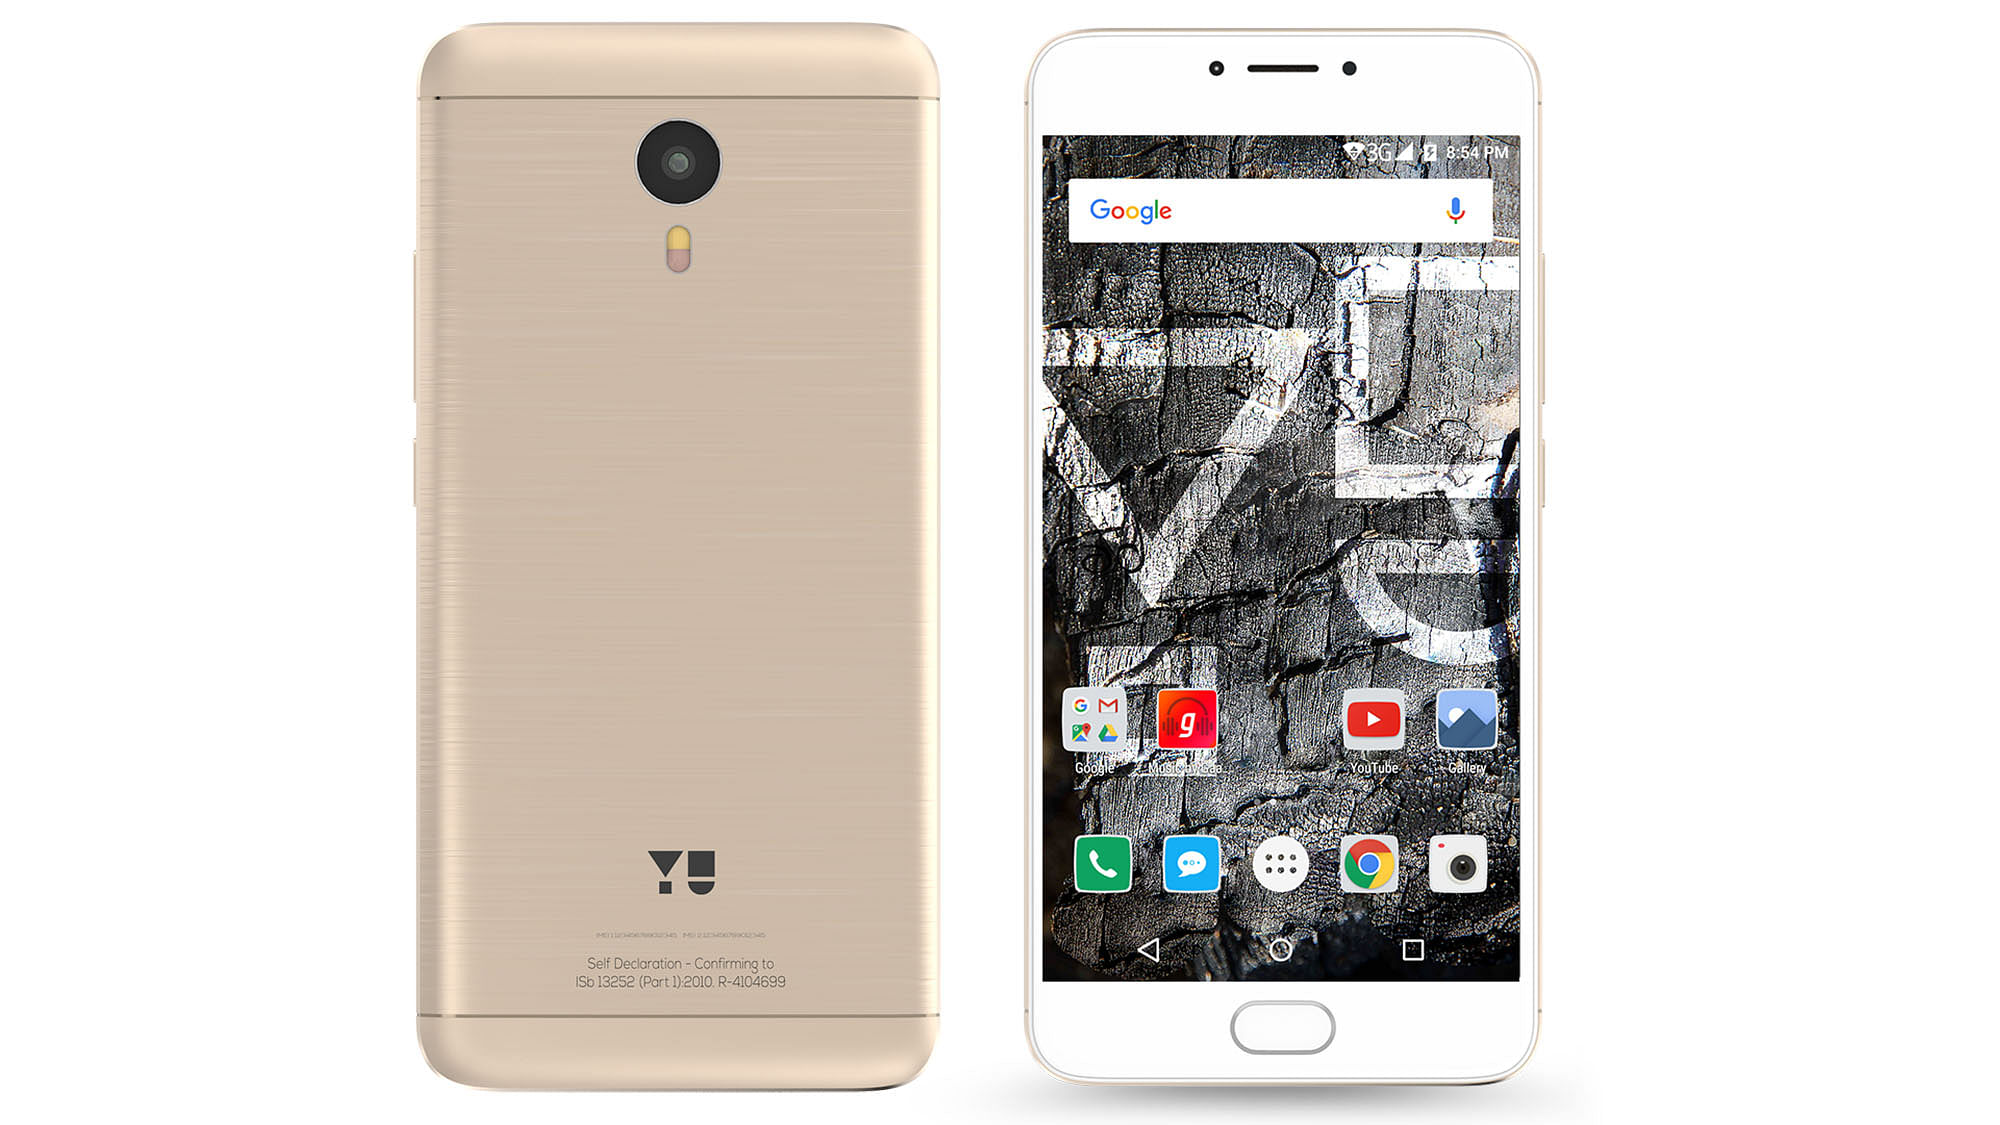 YU Yunicorn promises a lot for Rs 12,999 price point. (Photo Courtesy: Yu Televentures)